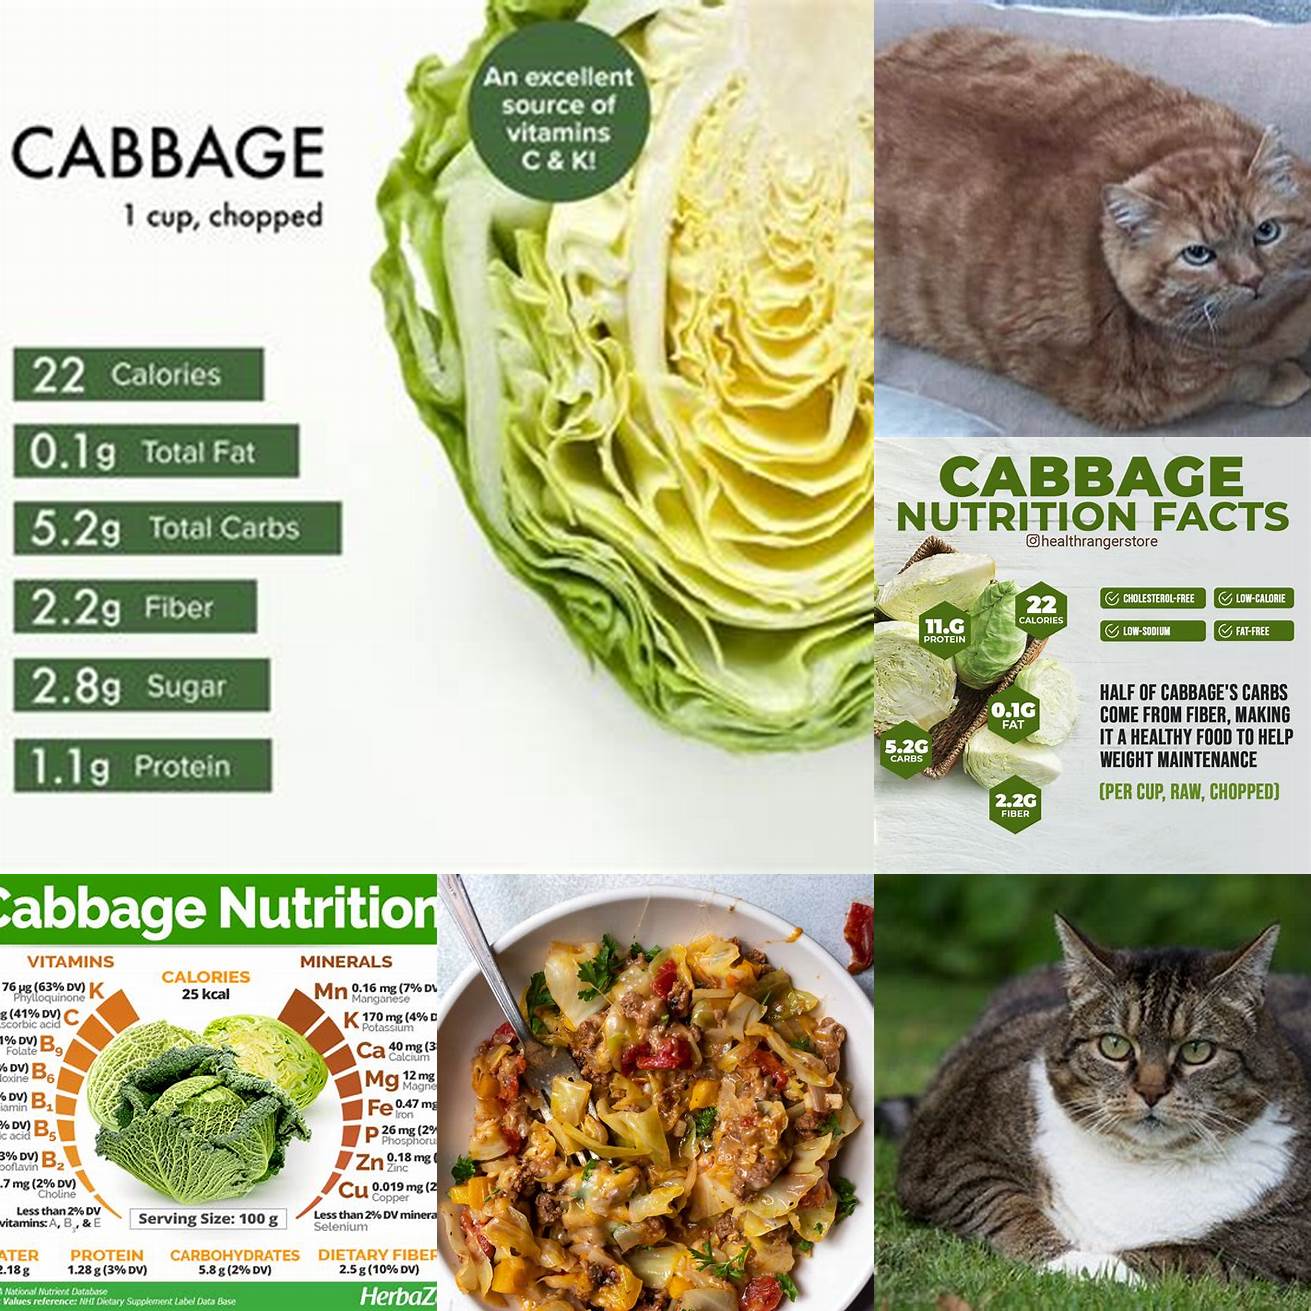 Cabbage is low in calories and can be a healthy snack for overweight or obese cats